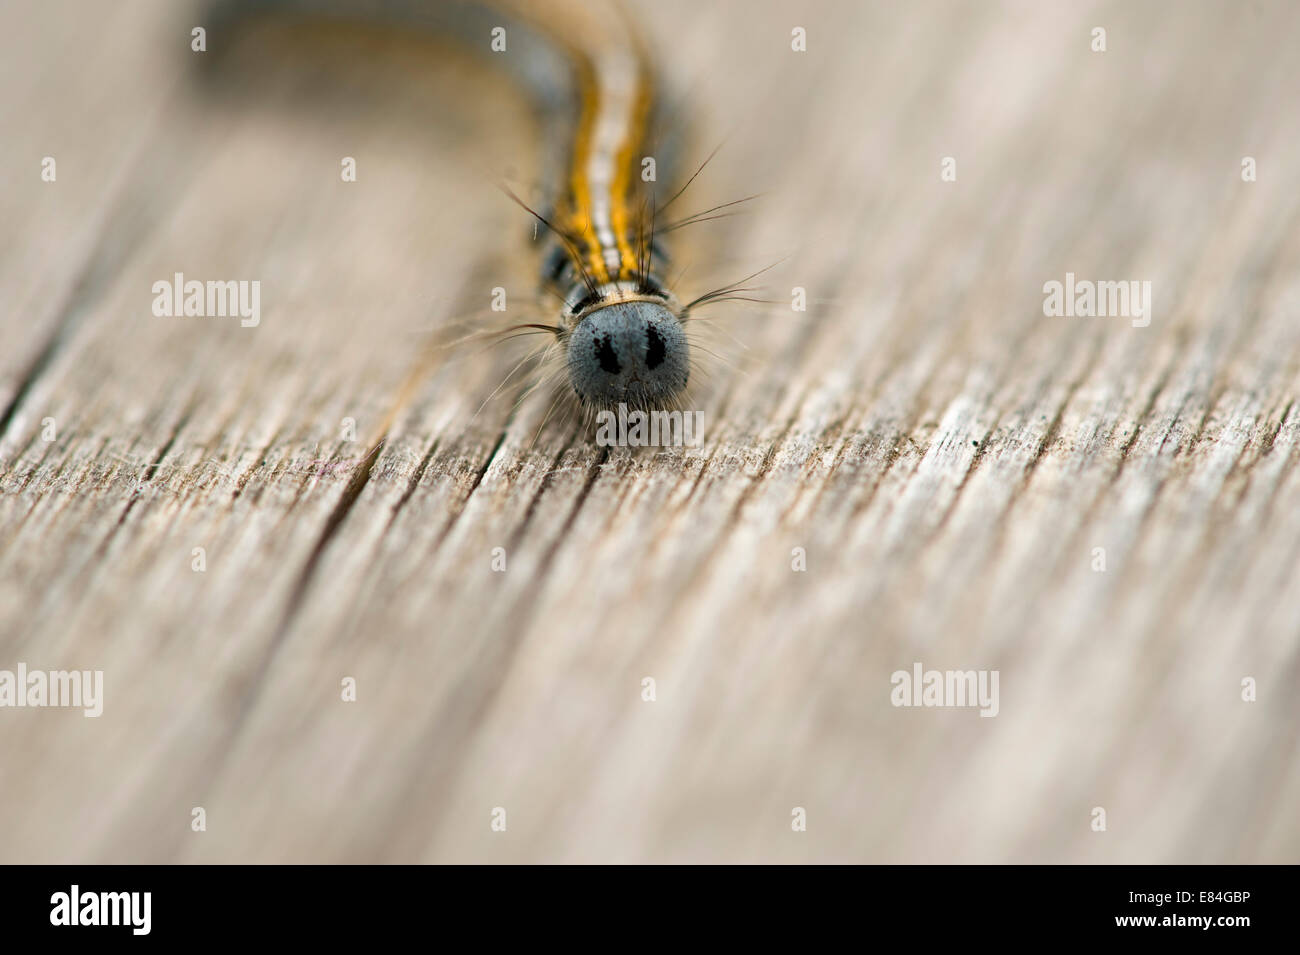 Caterpillar from the front Stock Photo